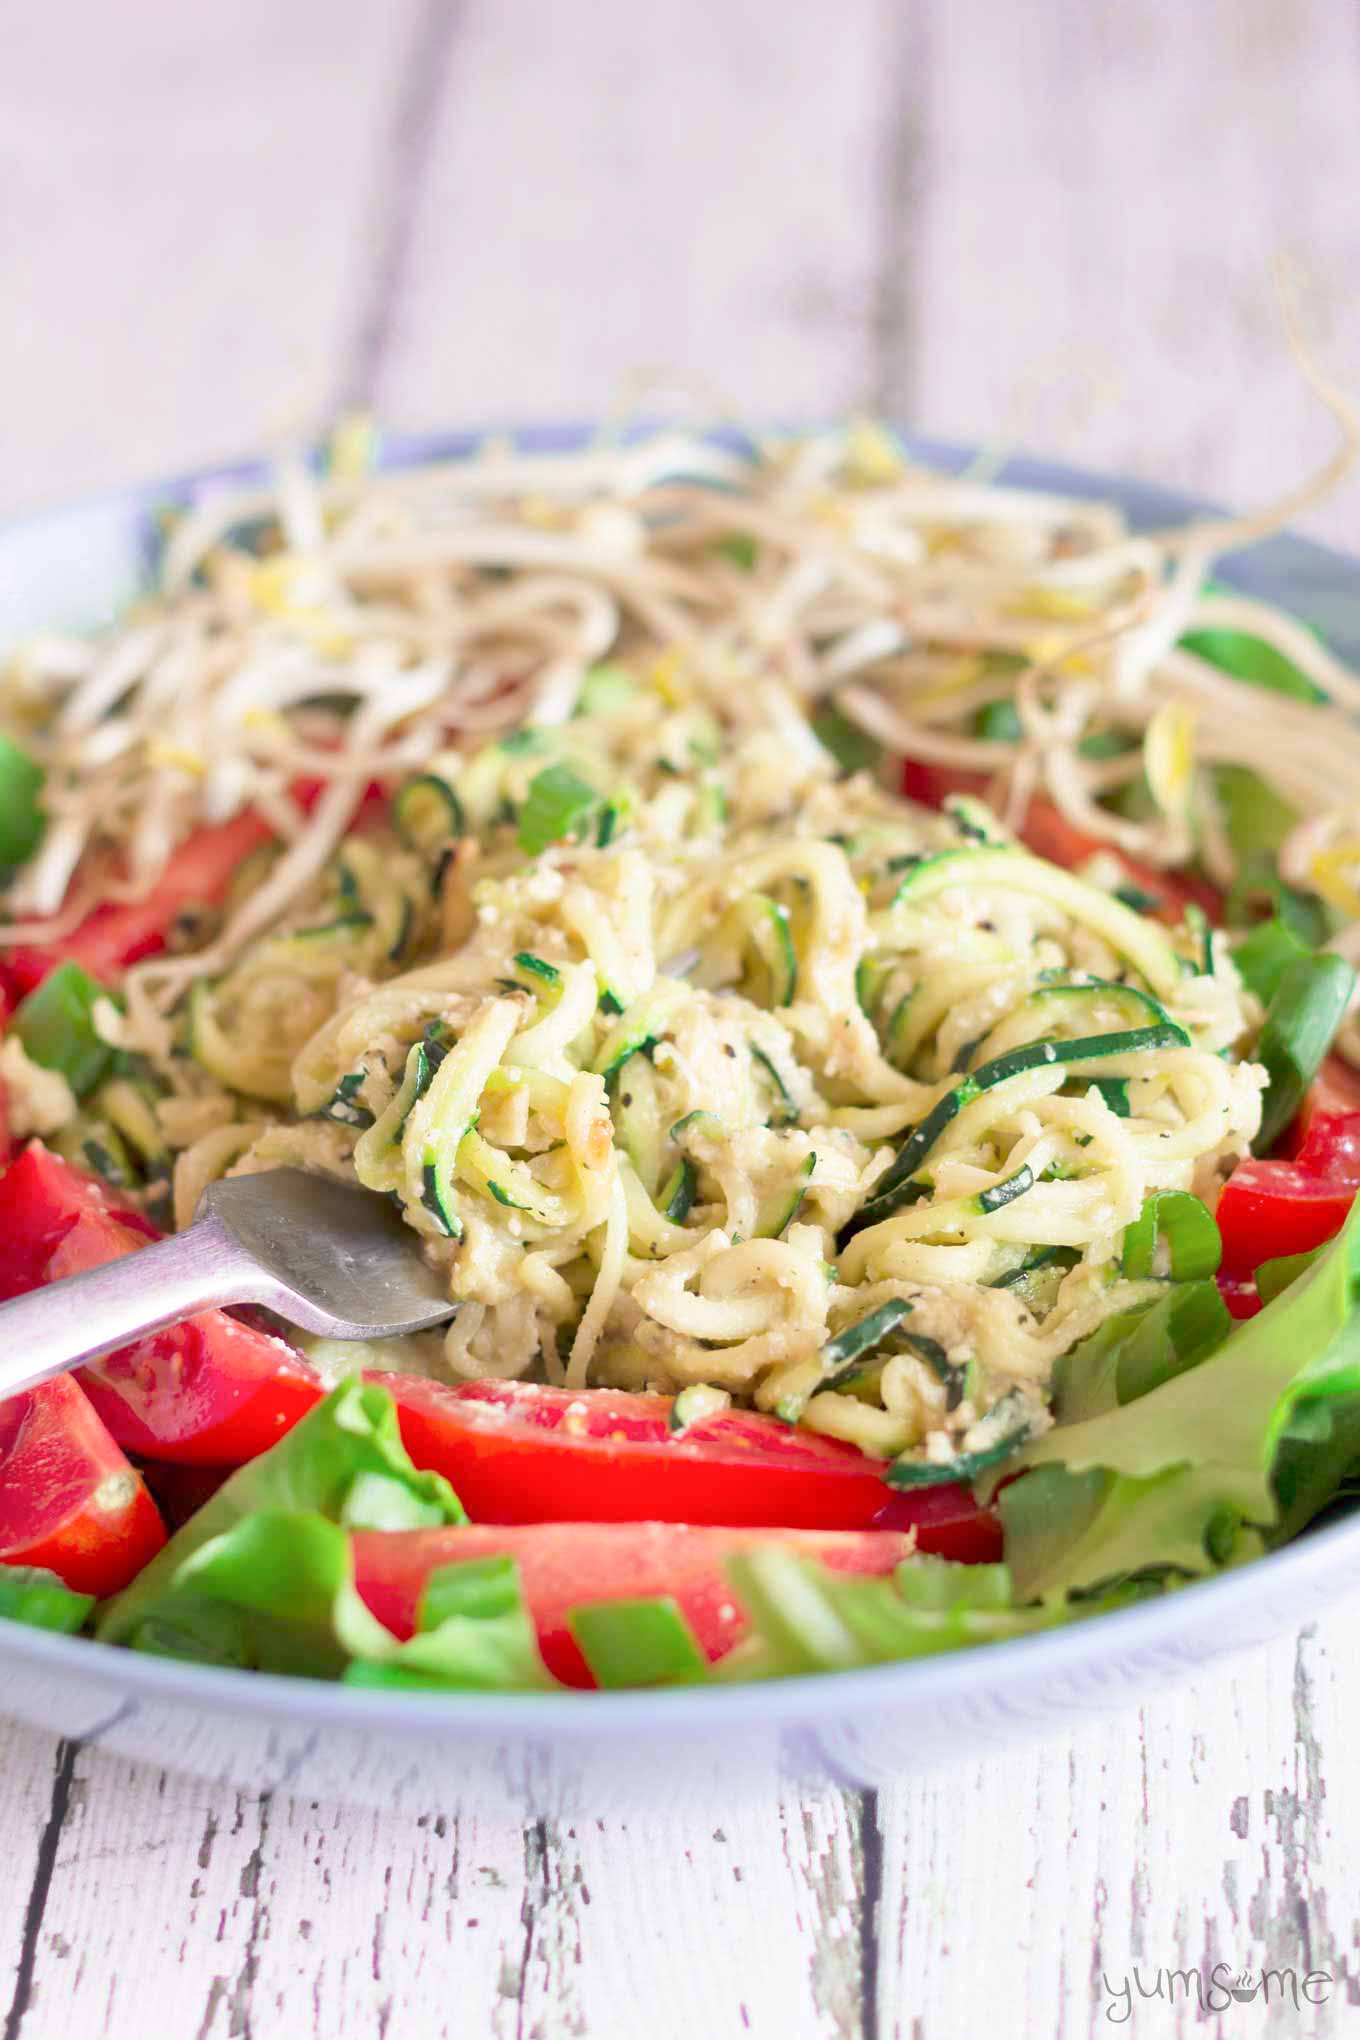 Hero imagage: Healthy 5-Ingredient Vegan Parmesan Zoodles | yumsome.com